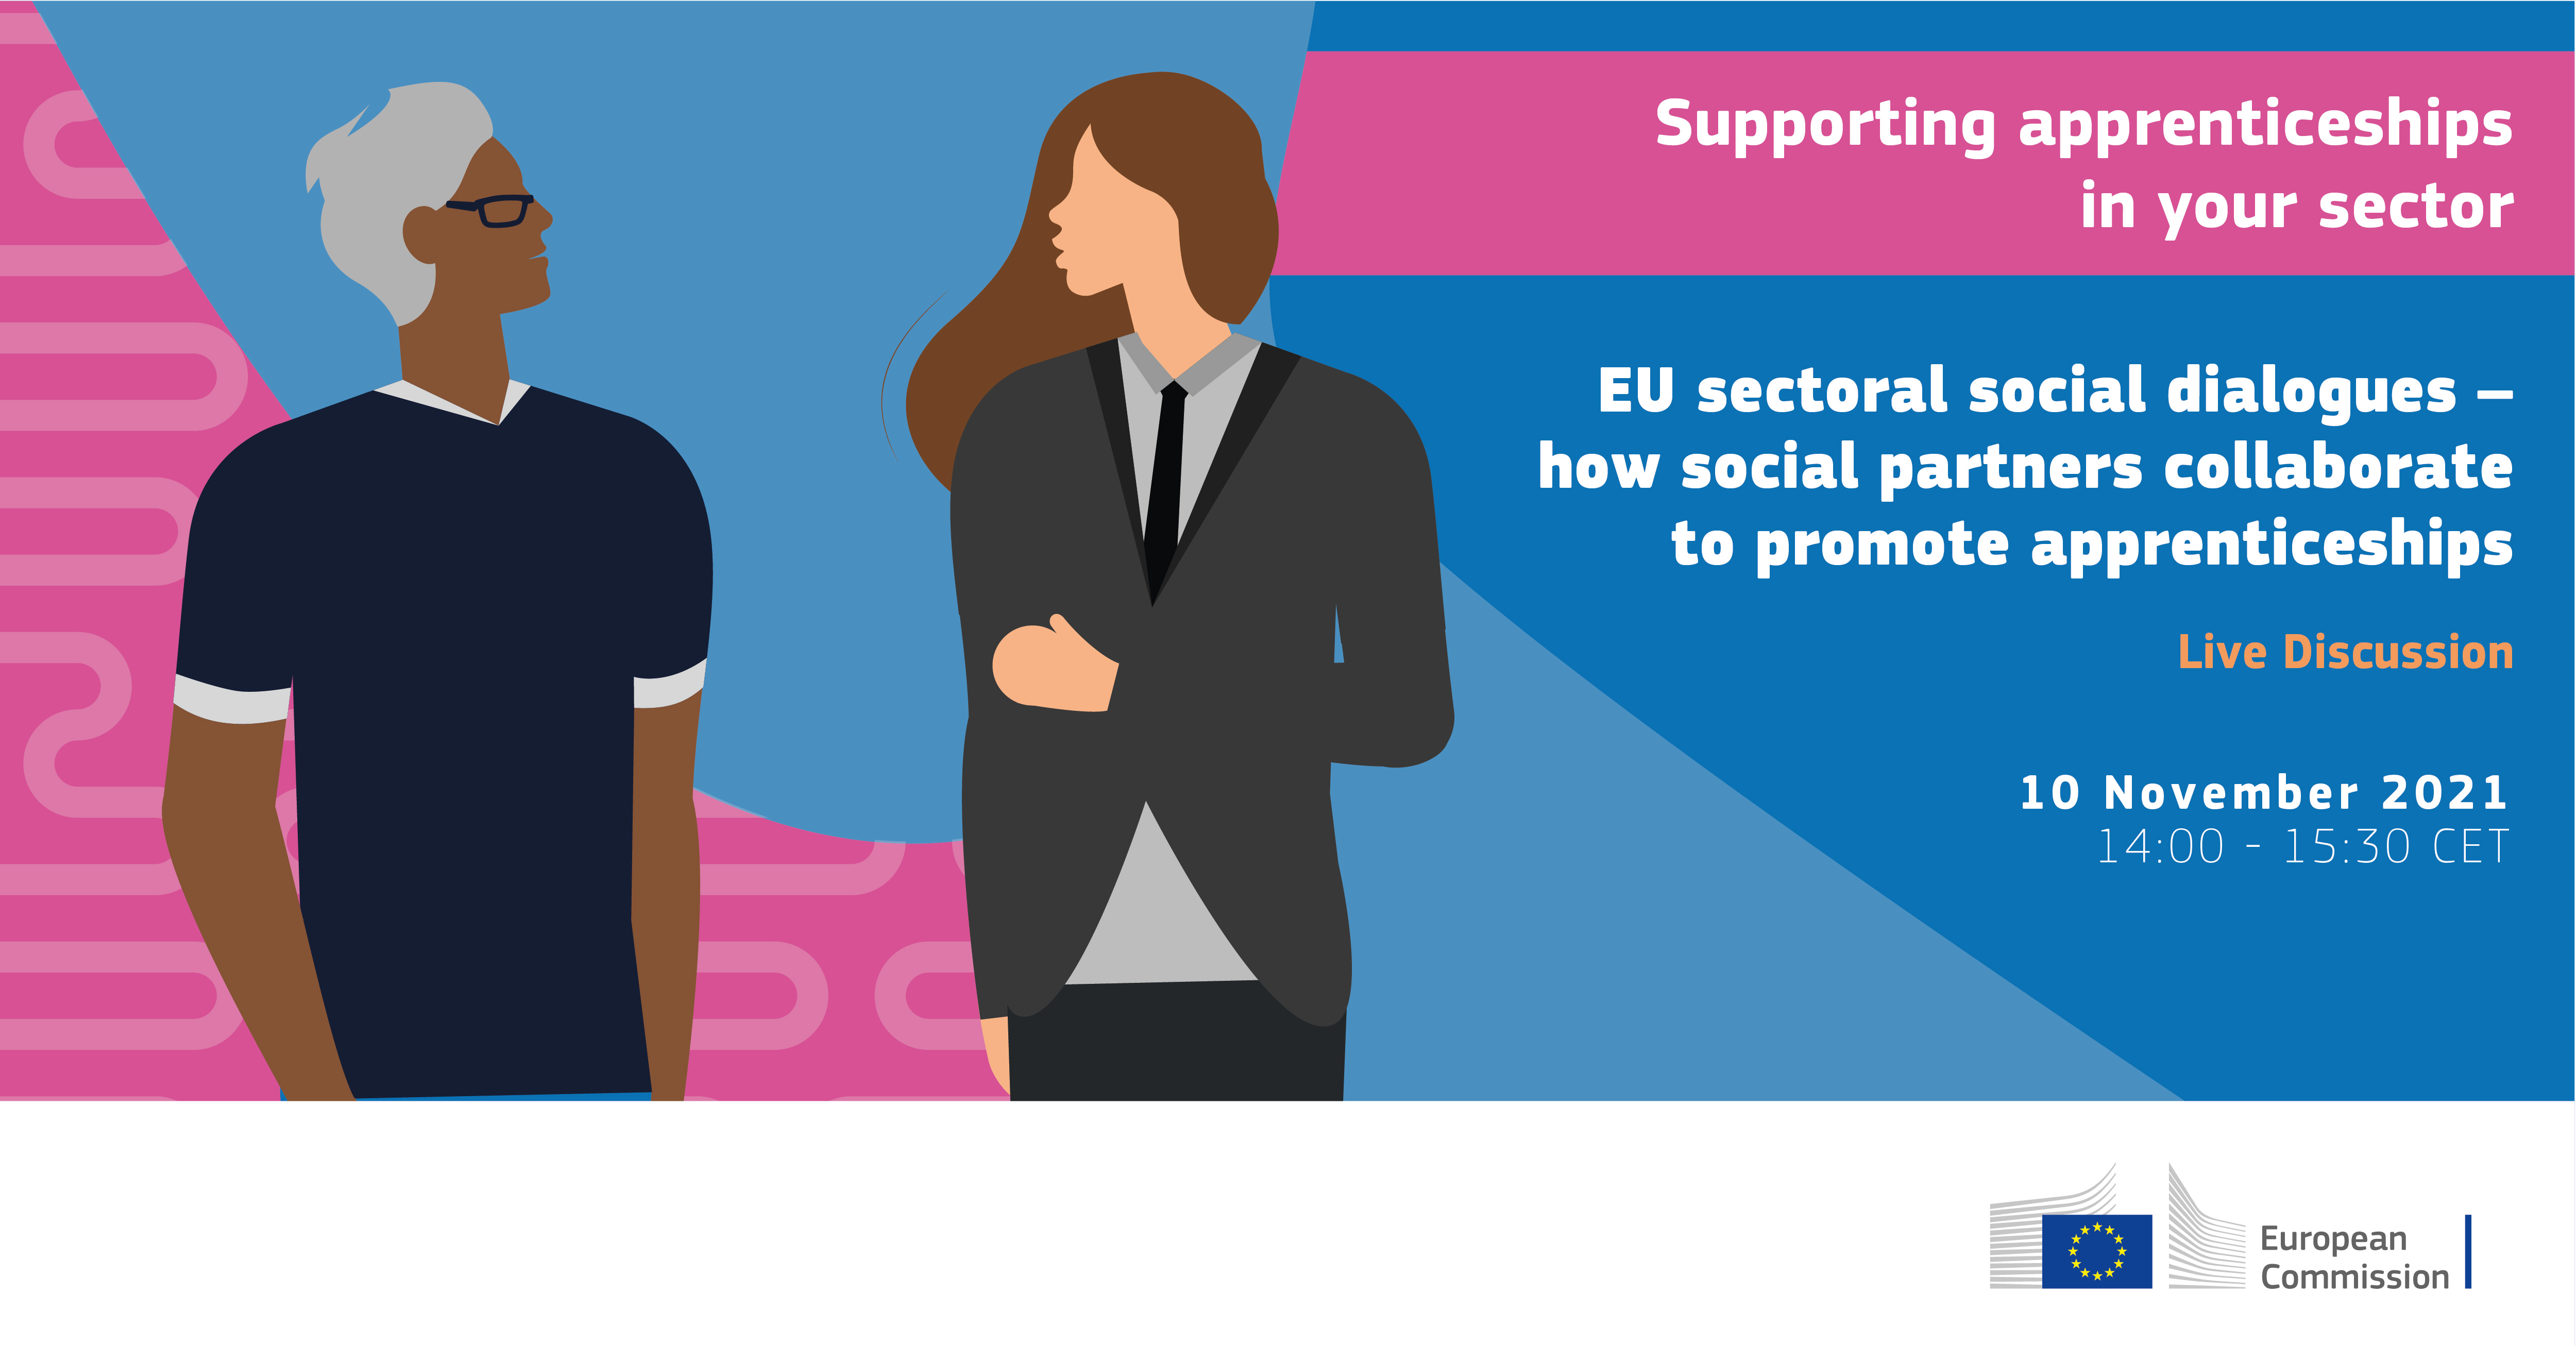 Supporting apprenticeships  in your sector. EU sectoral social dialogues - How social partners collaborate to promote apprenticeships. Live discussion. 10 November 2021. 14:00 - 15:30 CET